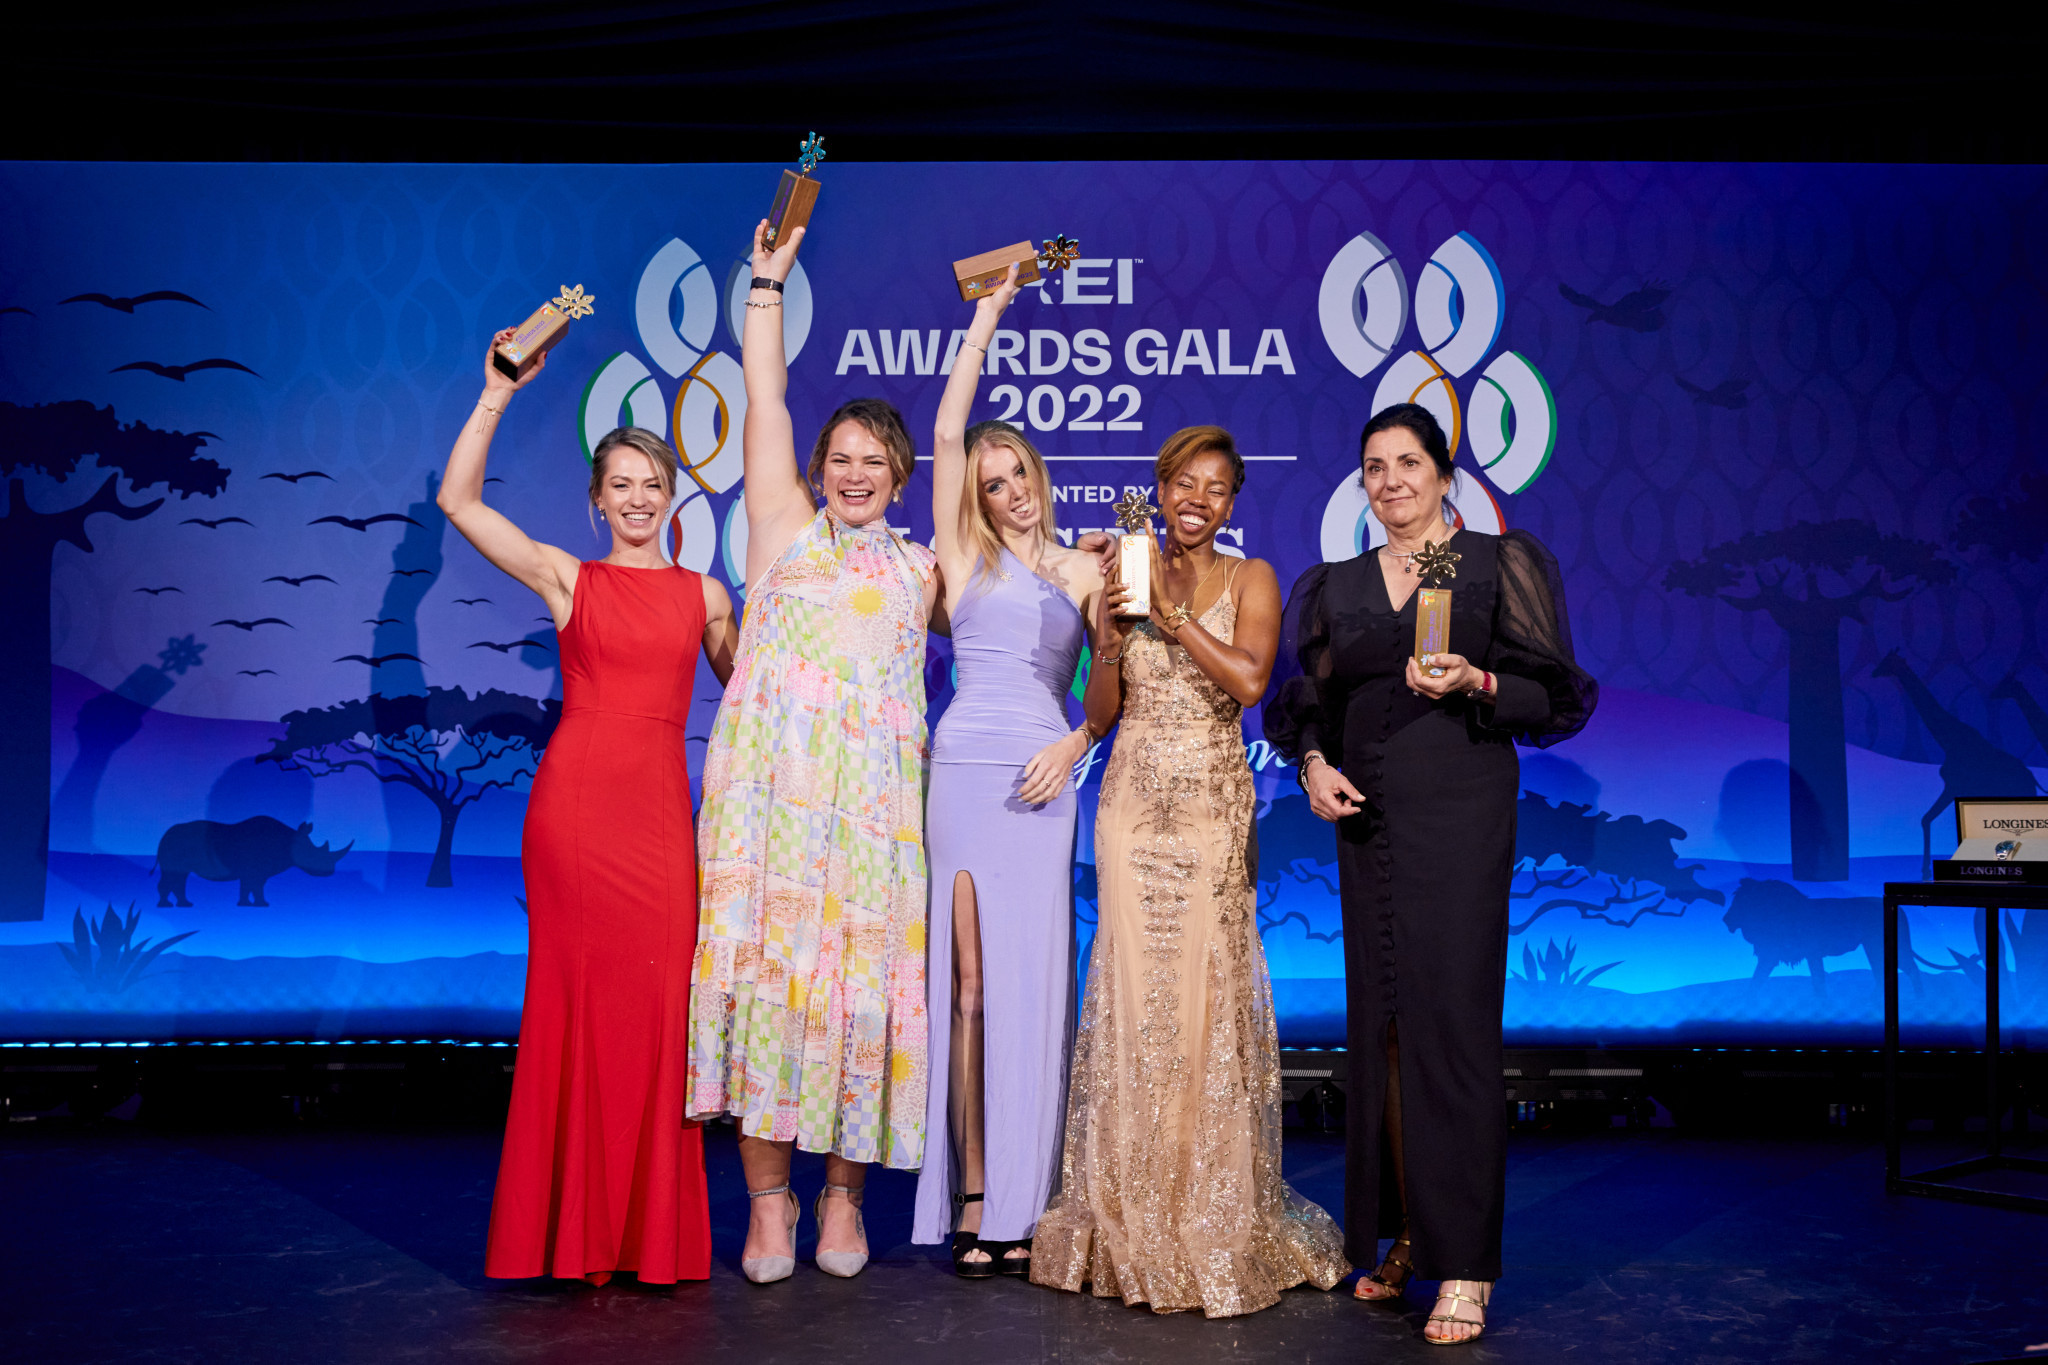 Double world champion Fry headlines all-female winners list at FEI Awards